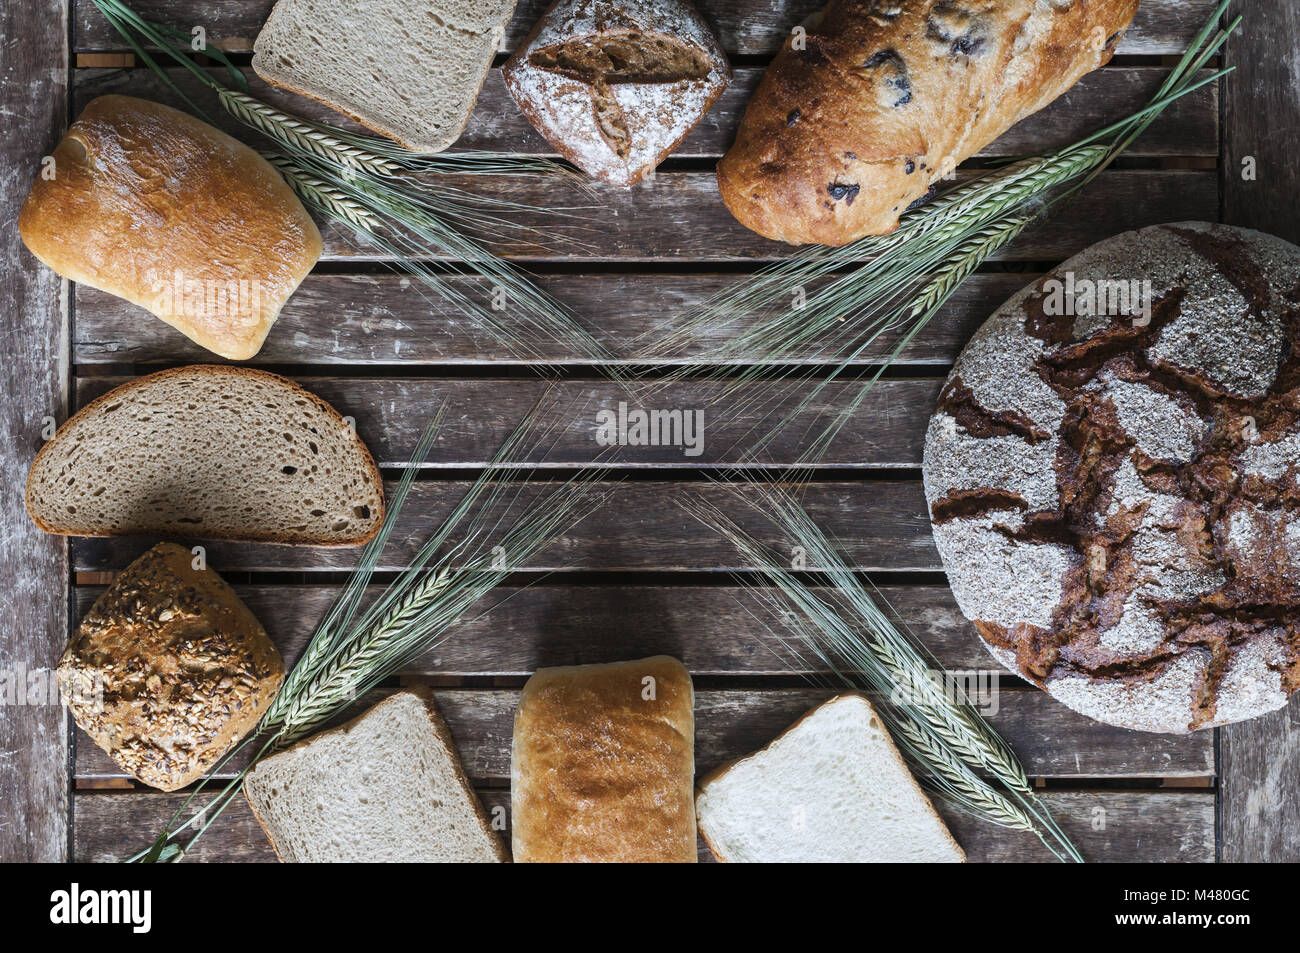 Different kinds of bread Stock Photo